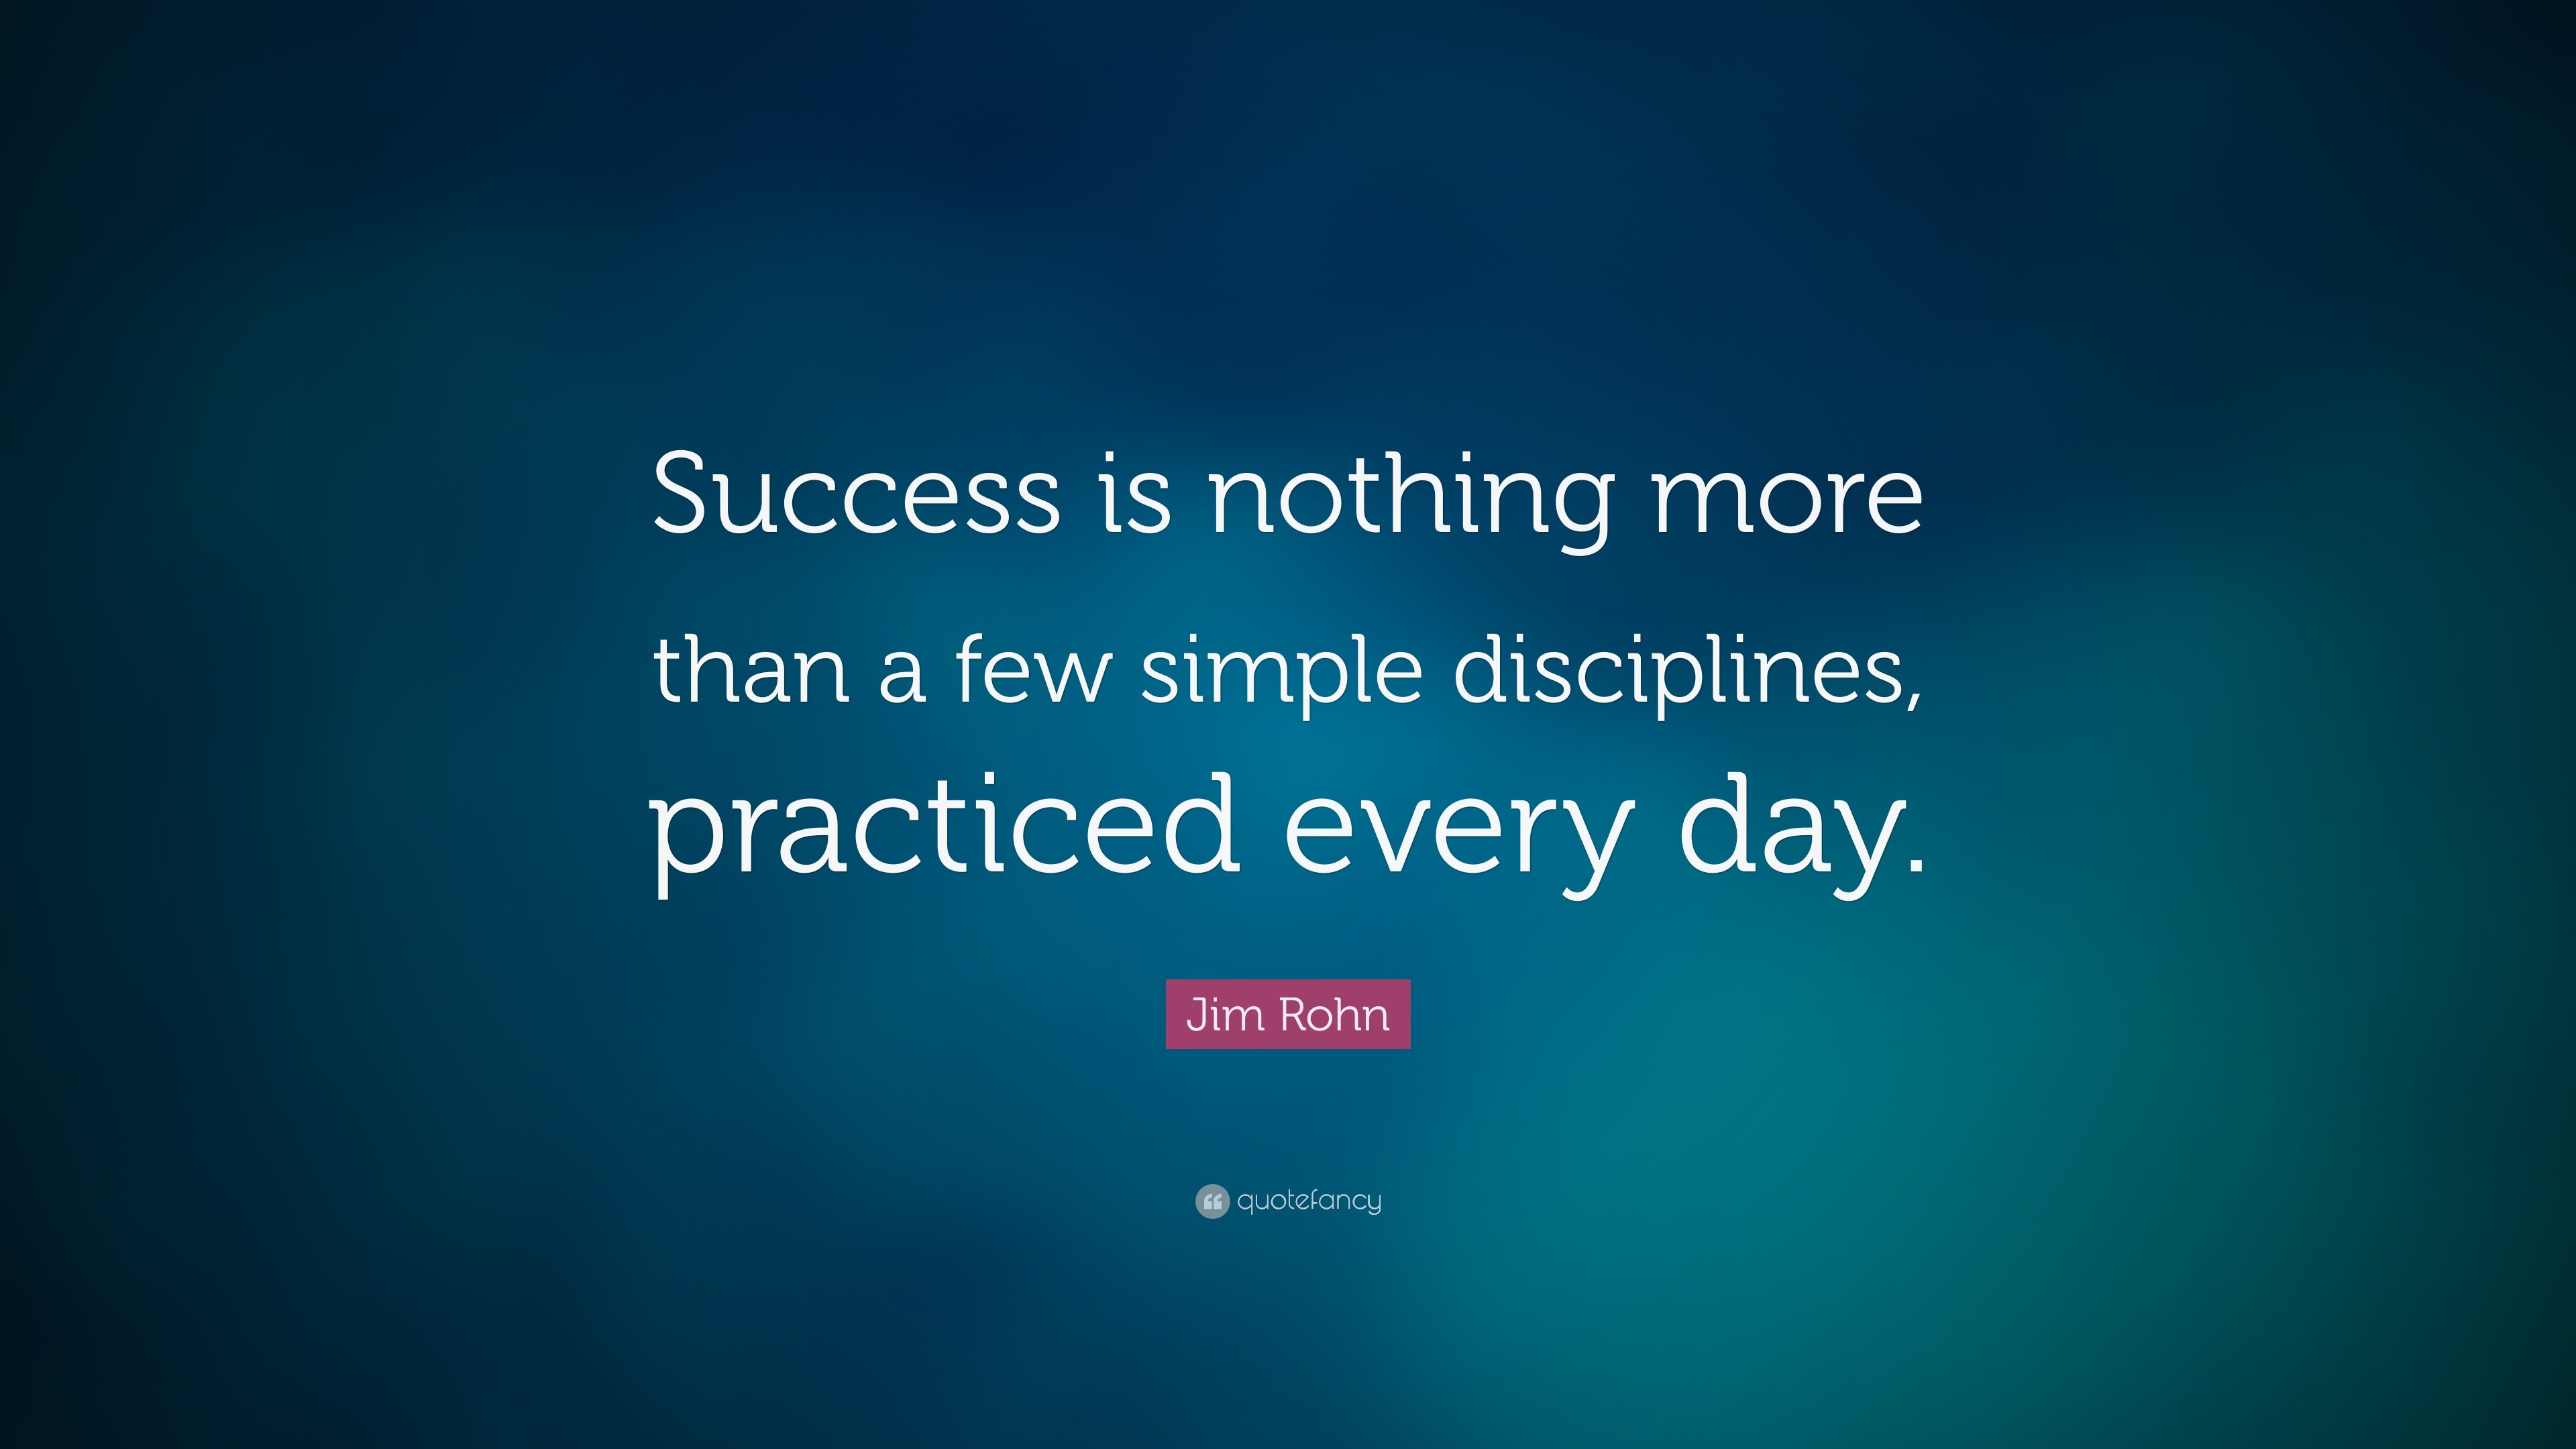 Red Success Is a Few Simple Disciplines cm974 NEW Motivational Poster 